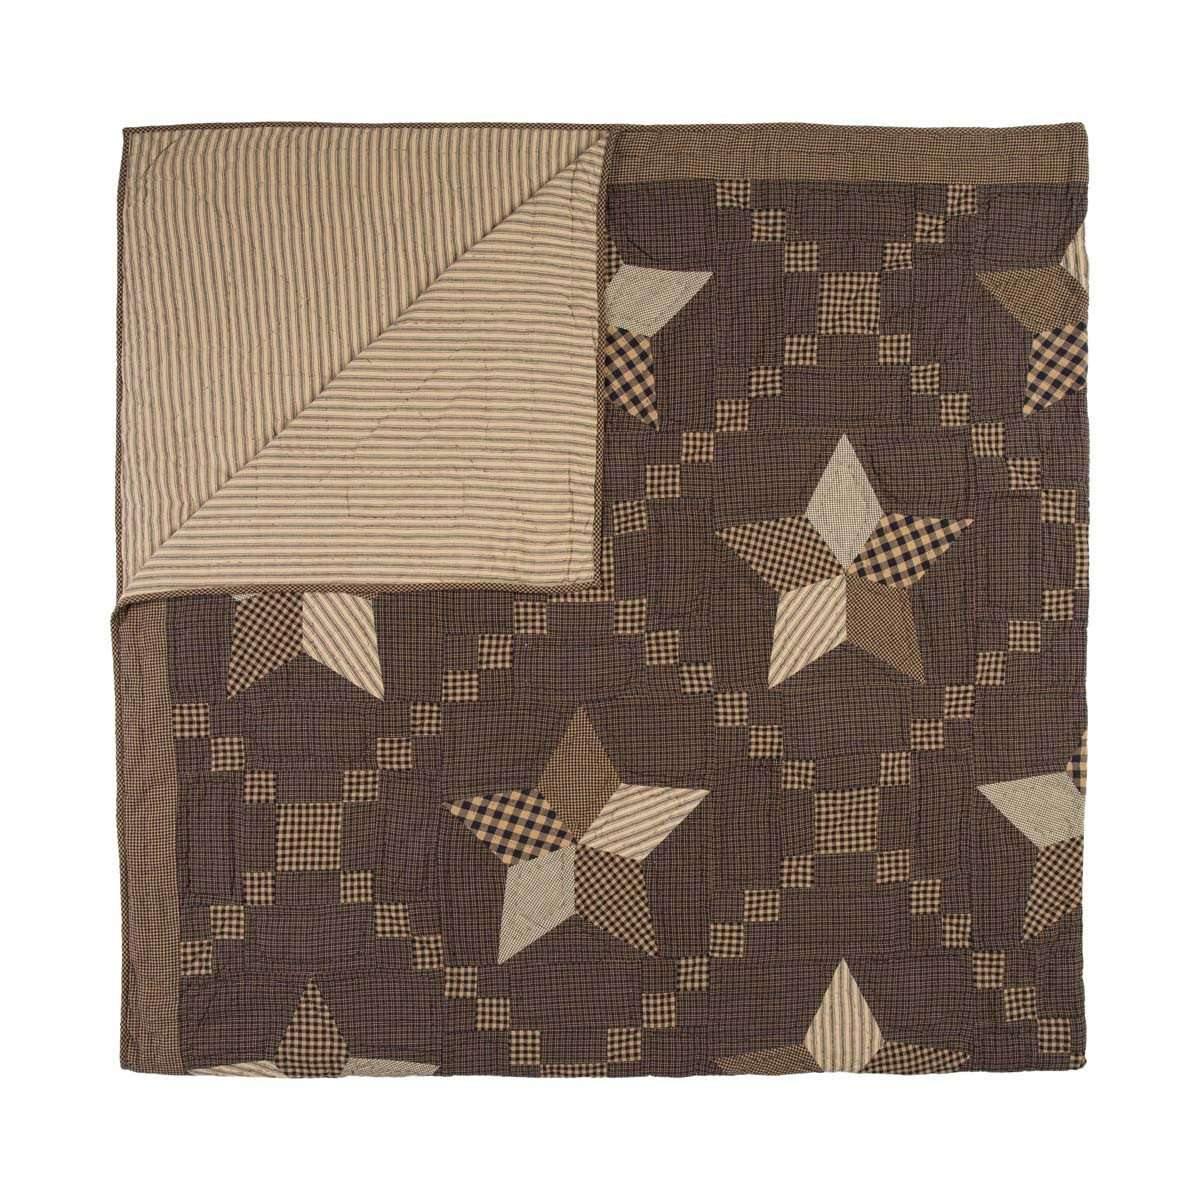 Farmhouse Star King Quilt 110Wx97L VHC Brands folded